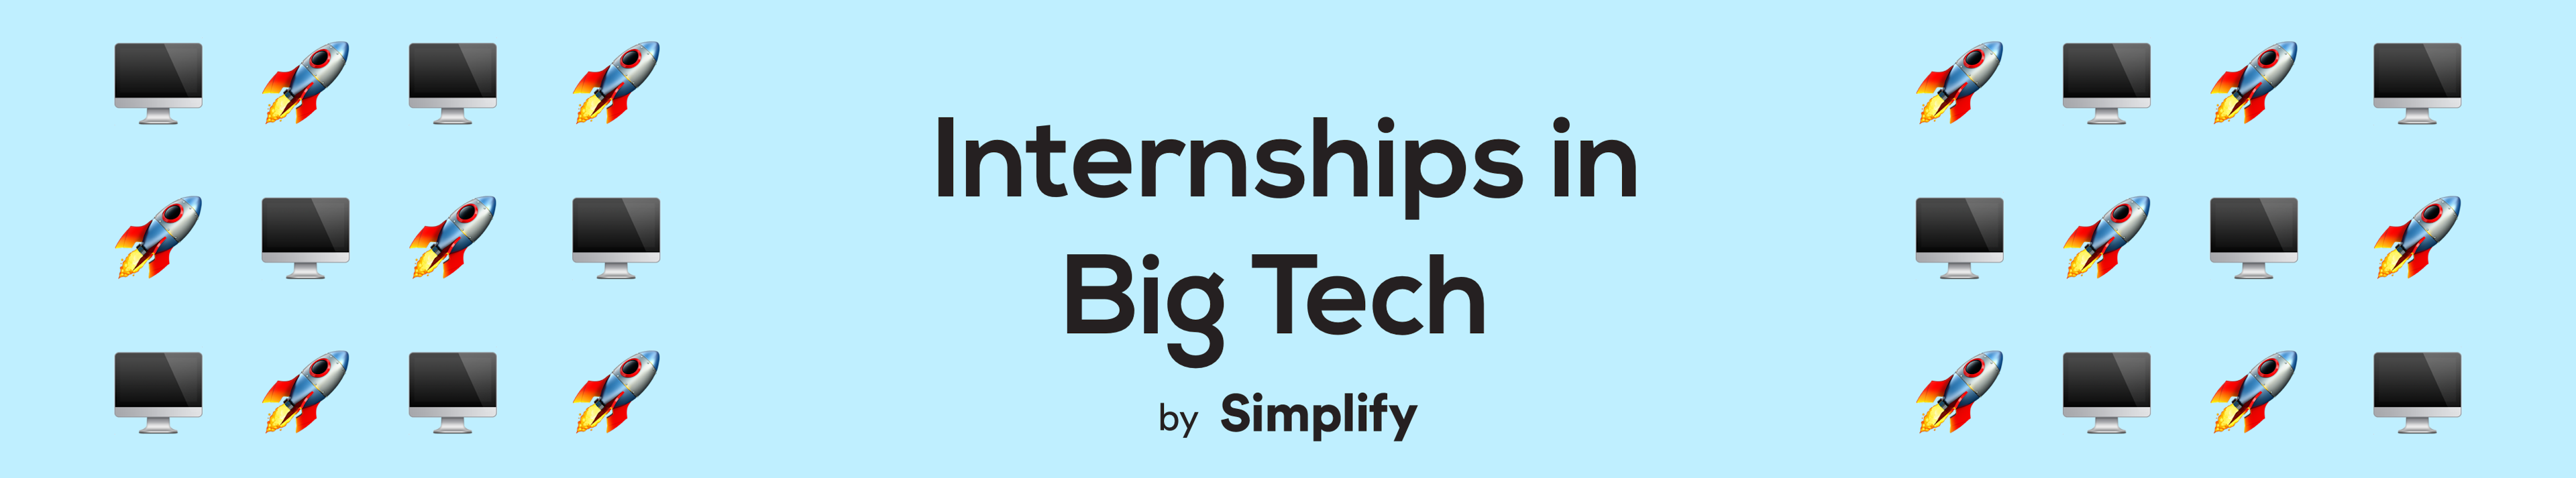 text that says “Internships in Big Tech” surrounded by computer and rocketship emojis